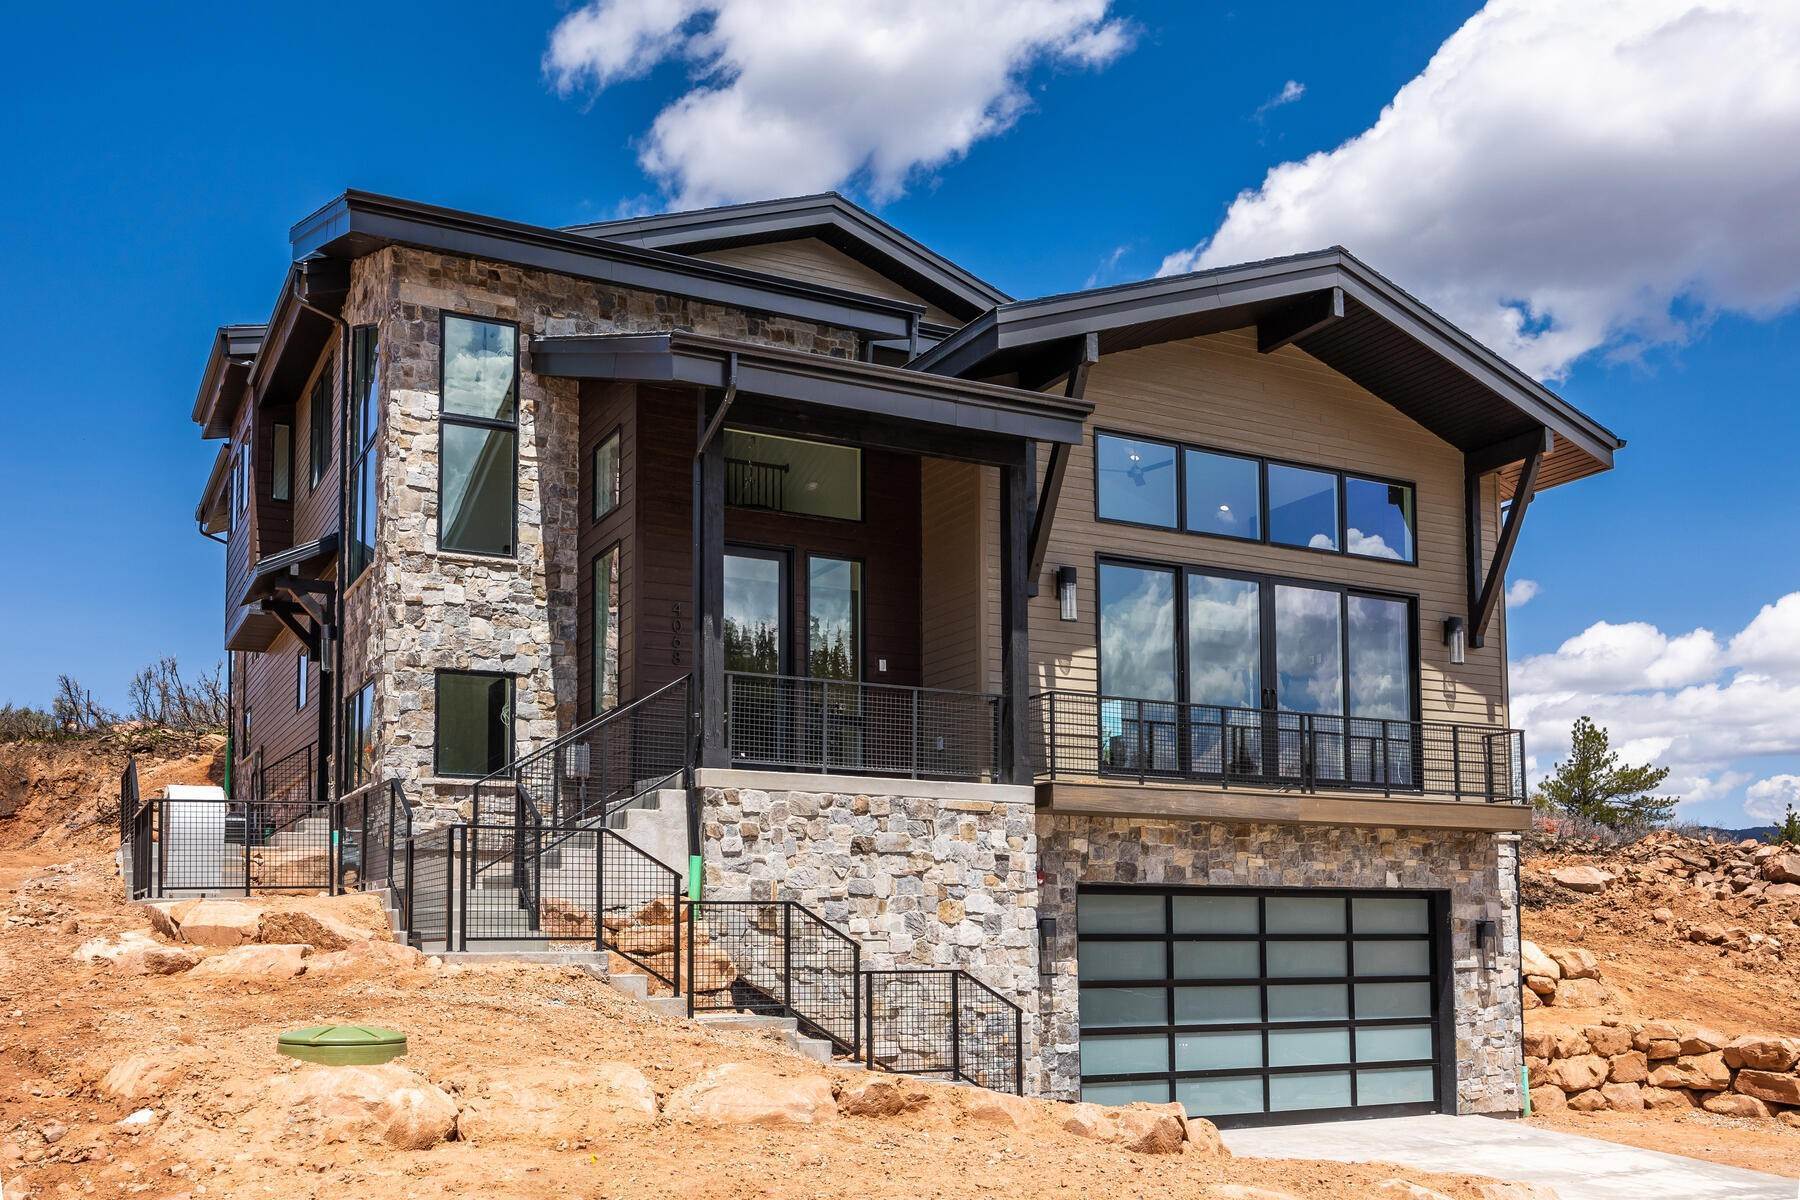 Single Family Homes for Sale at Move-In Ready And Turn-Key Availability! 4068 W Sierra Drive, Lot 228 Park City, Utah 84098 United States